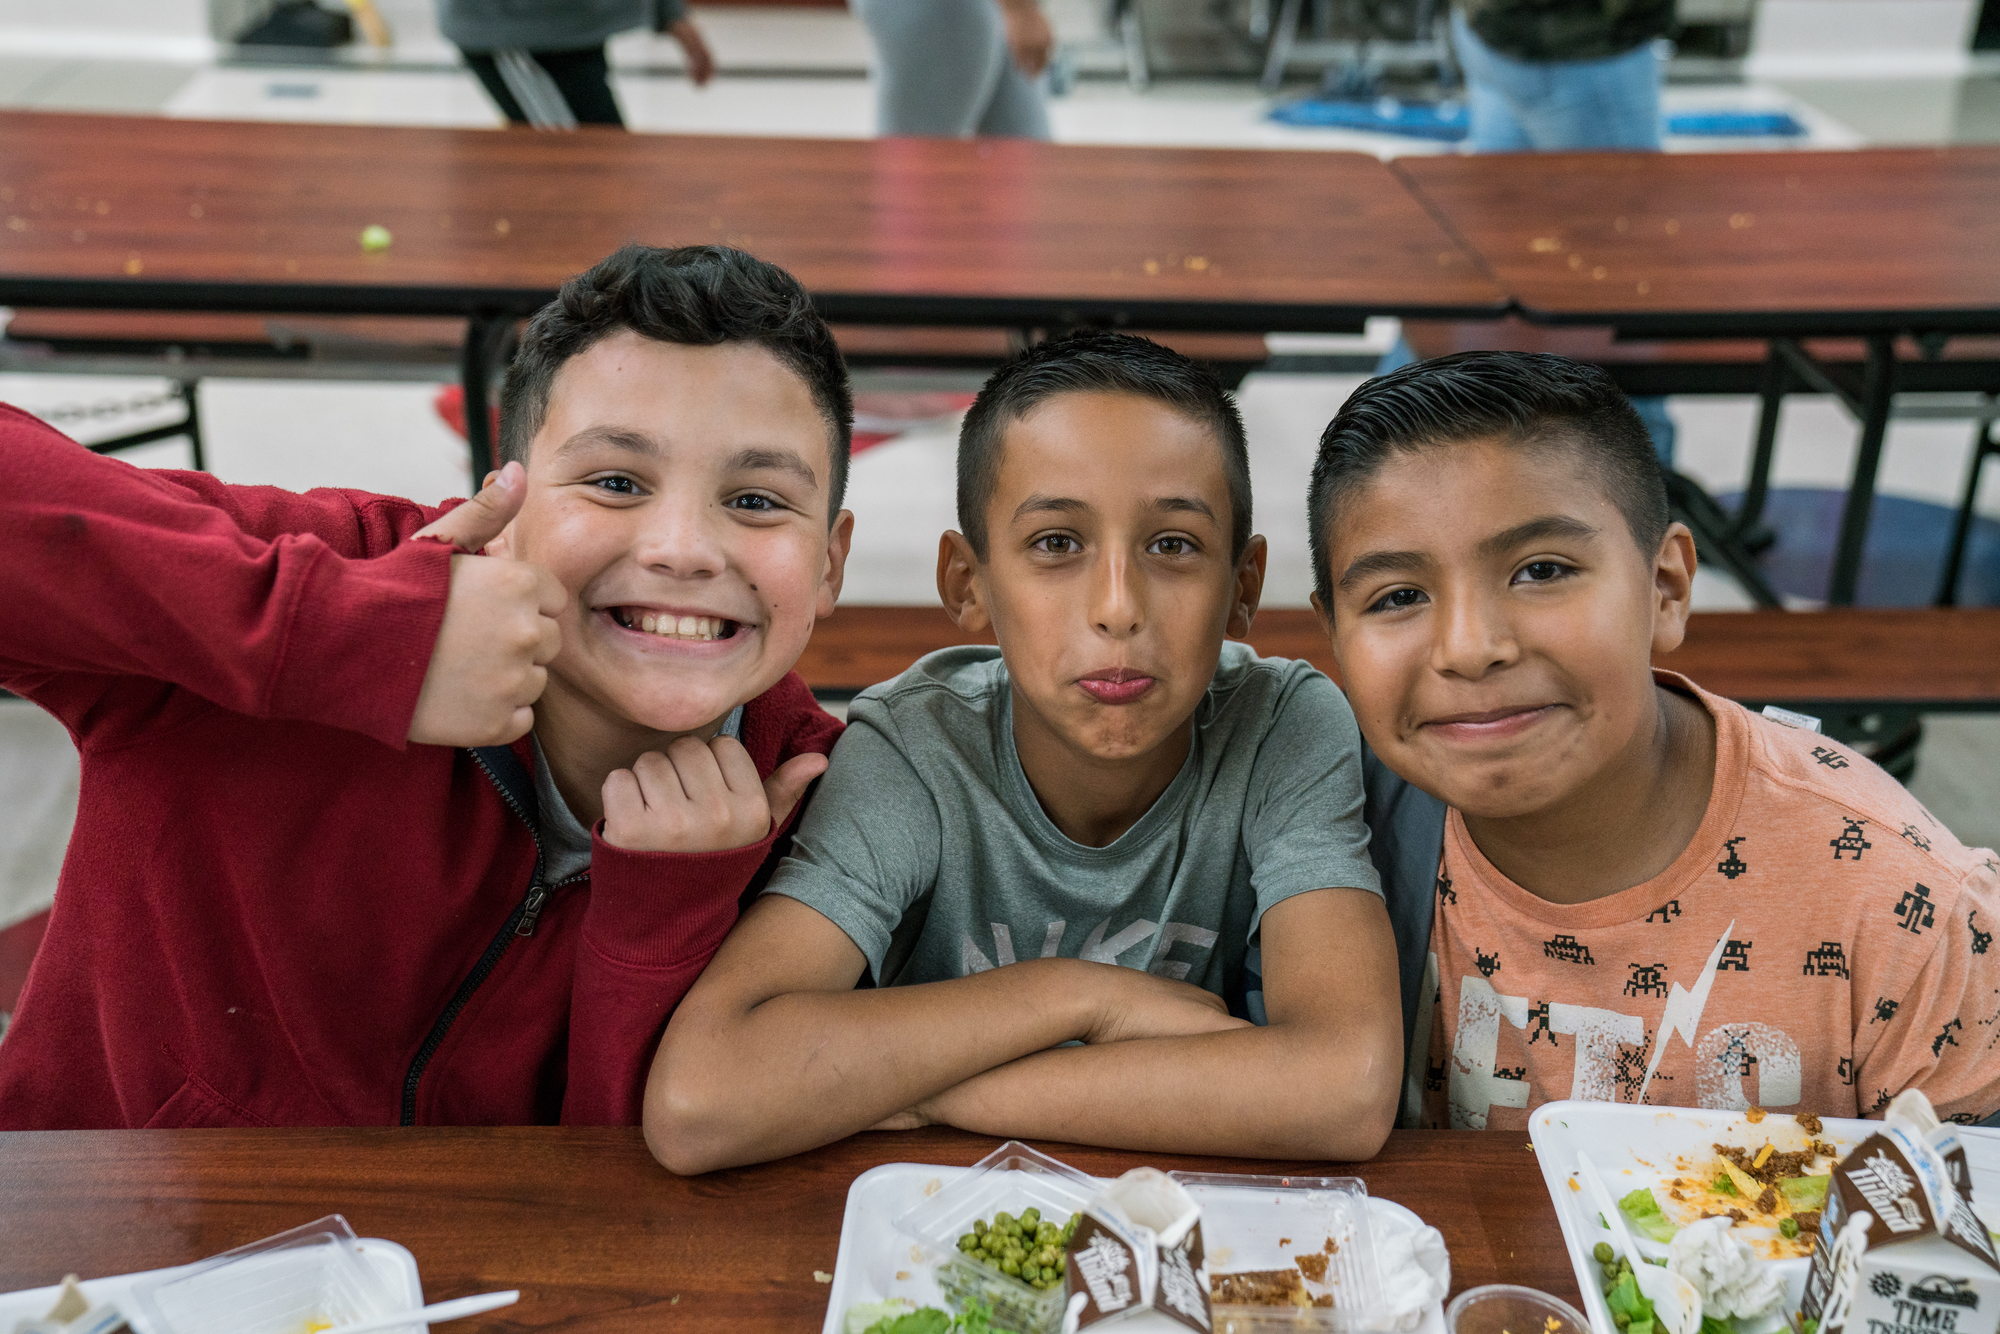 Three students sit smiling at a lunch table, trays in front of them.